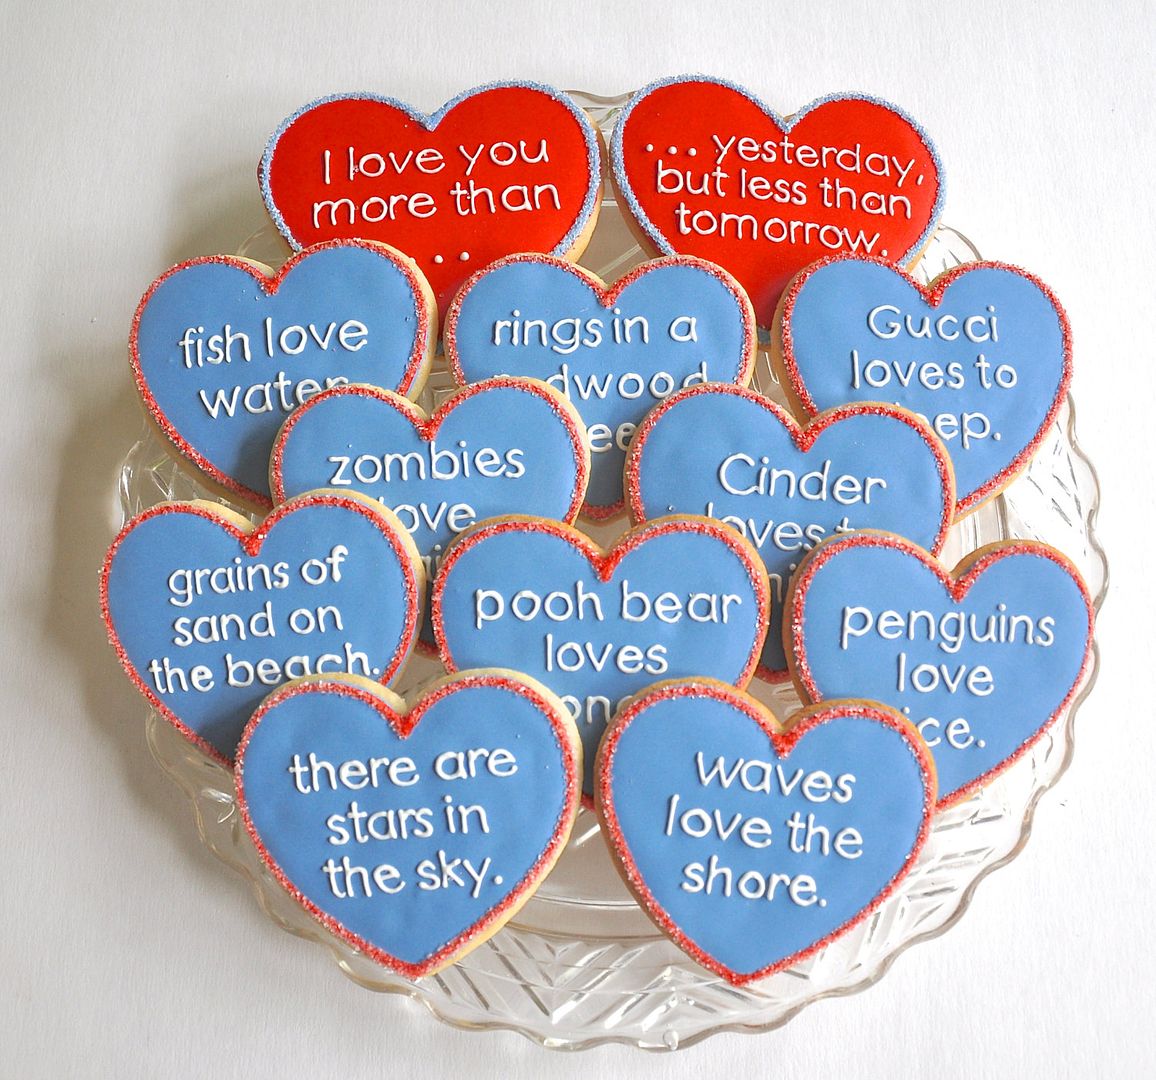 Cool Valentine's cookies: I love you more than… cookies from Kelley Hart Cookies